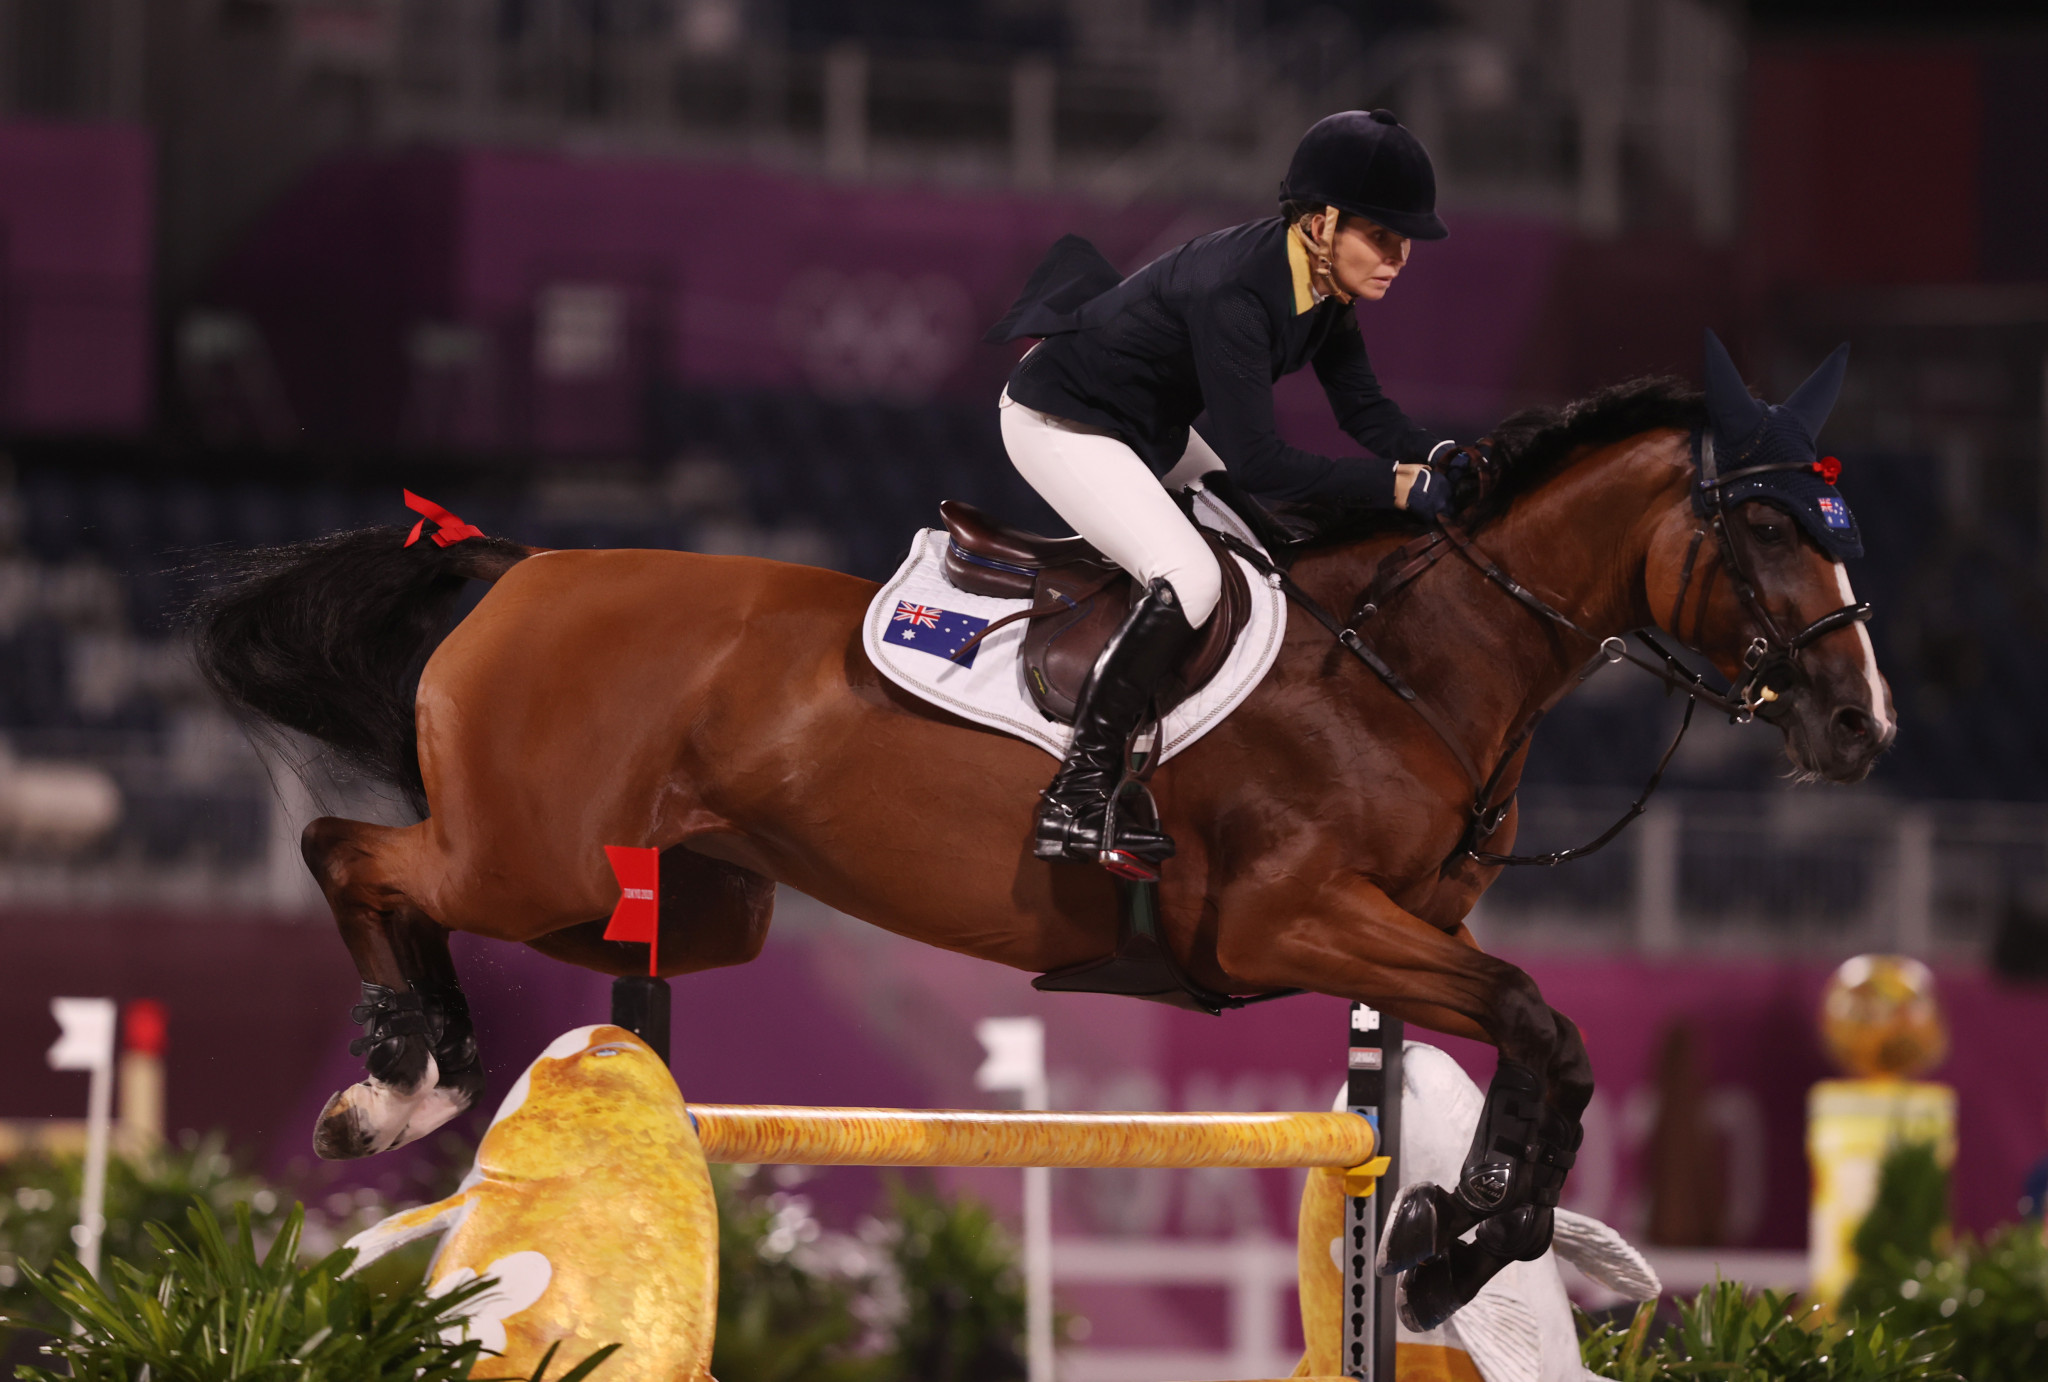 Edwina Tops-Alexander is yet to secure a place on the GCT Super Grand Prix, despite sitting third in the overall standings ©Getty Images